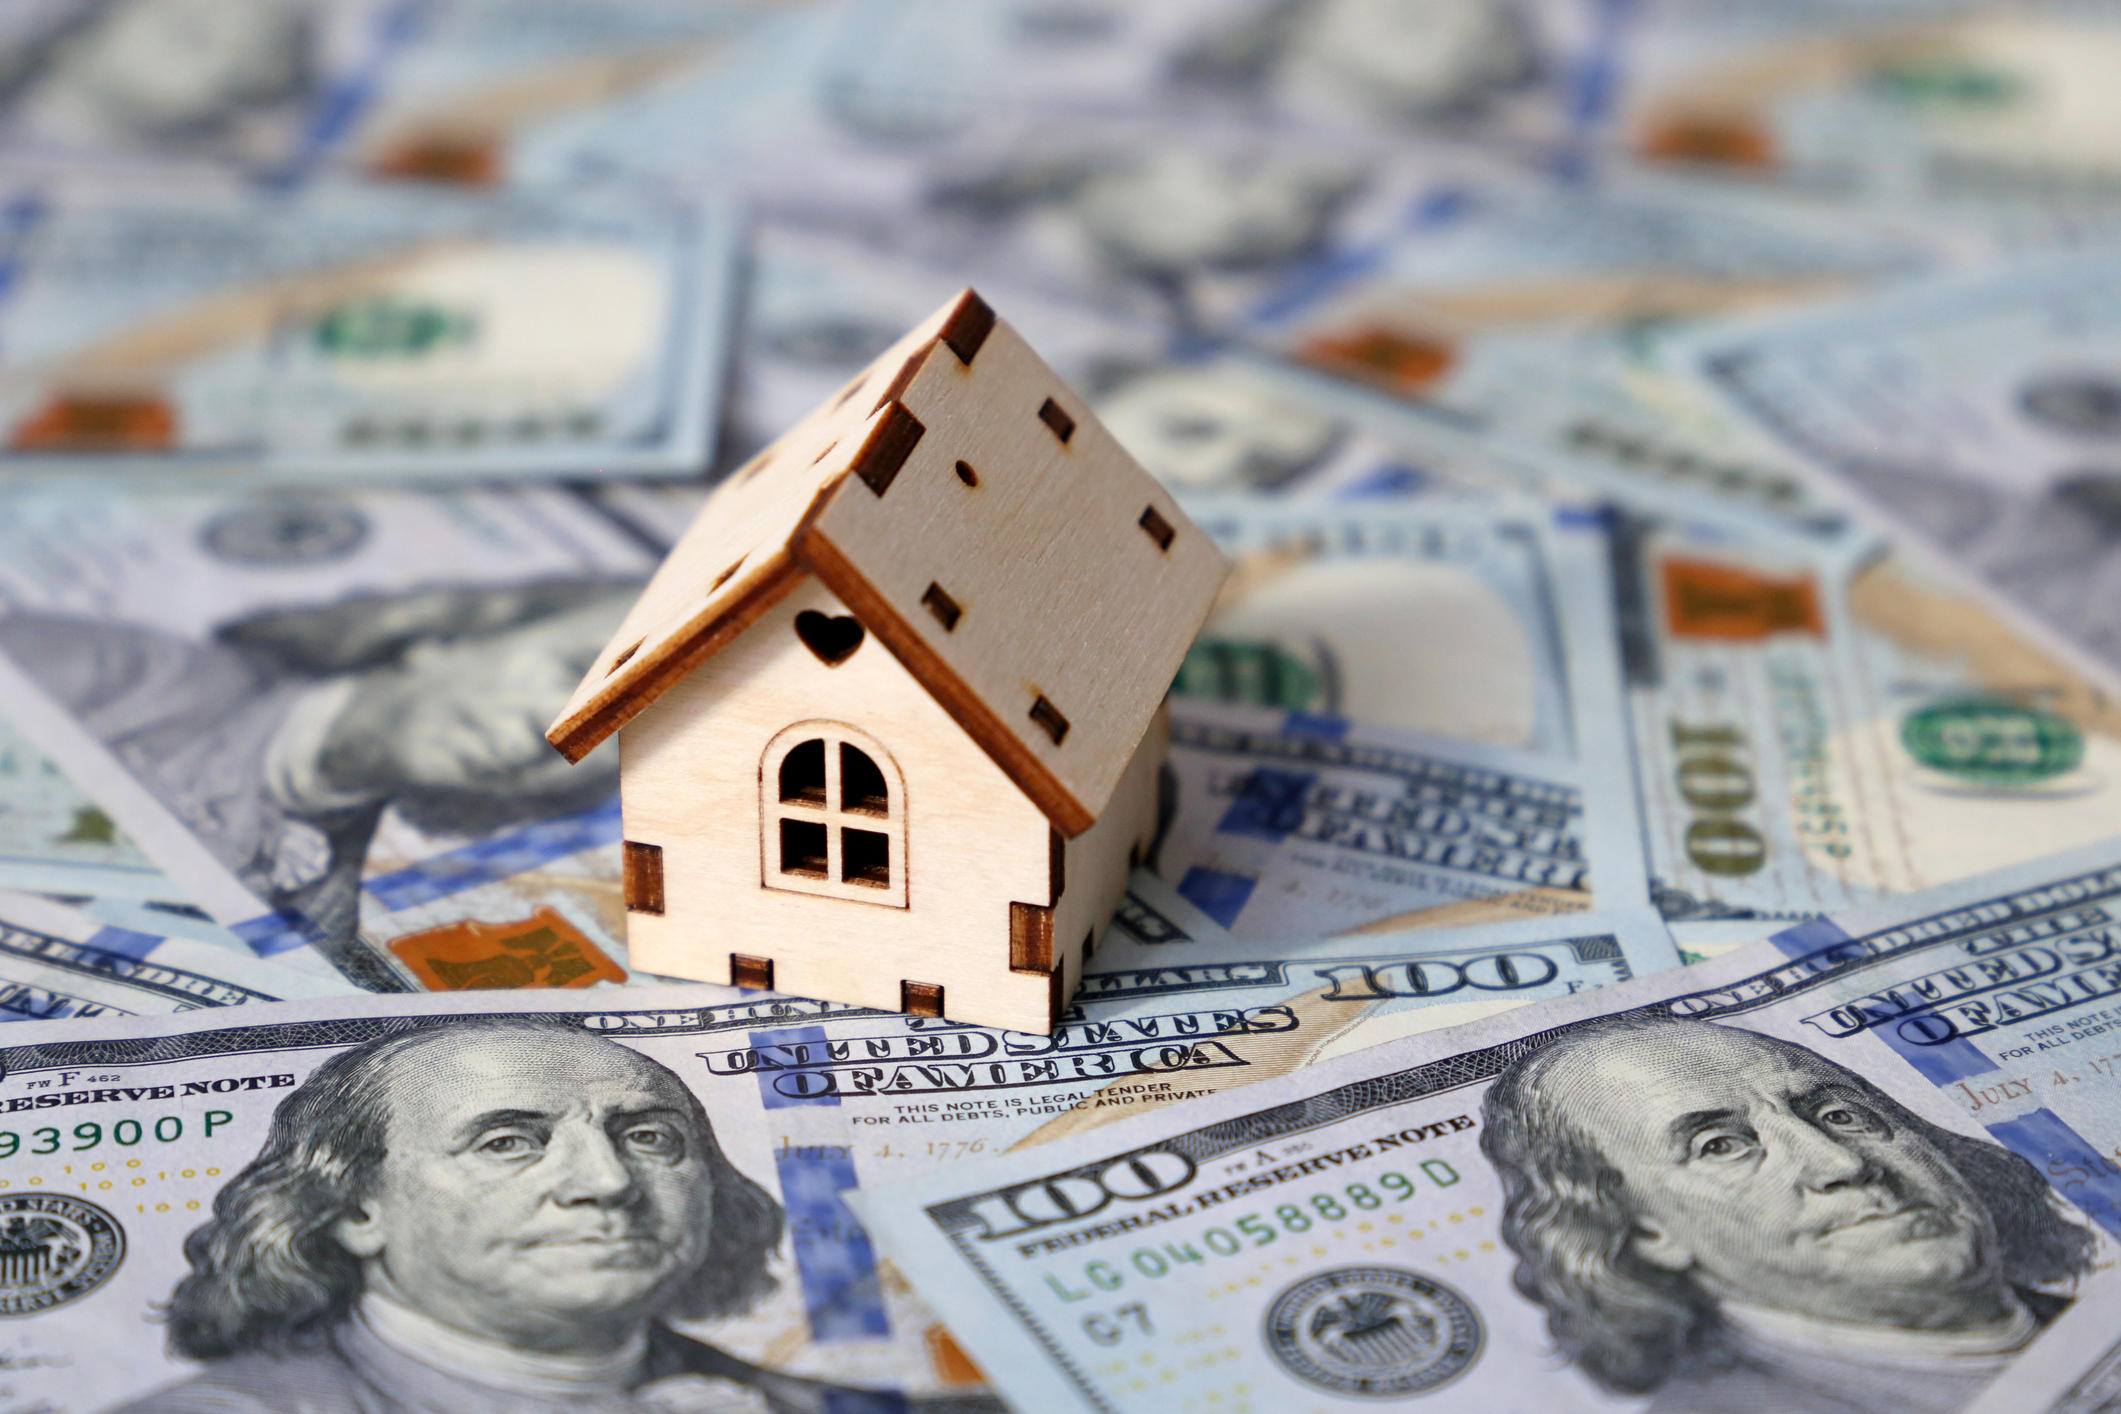 here's what a $300,000 home equity loan would cost monthly